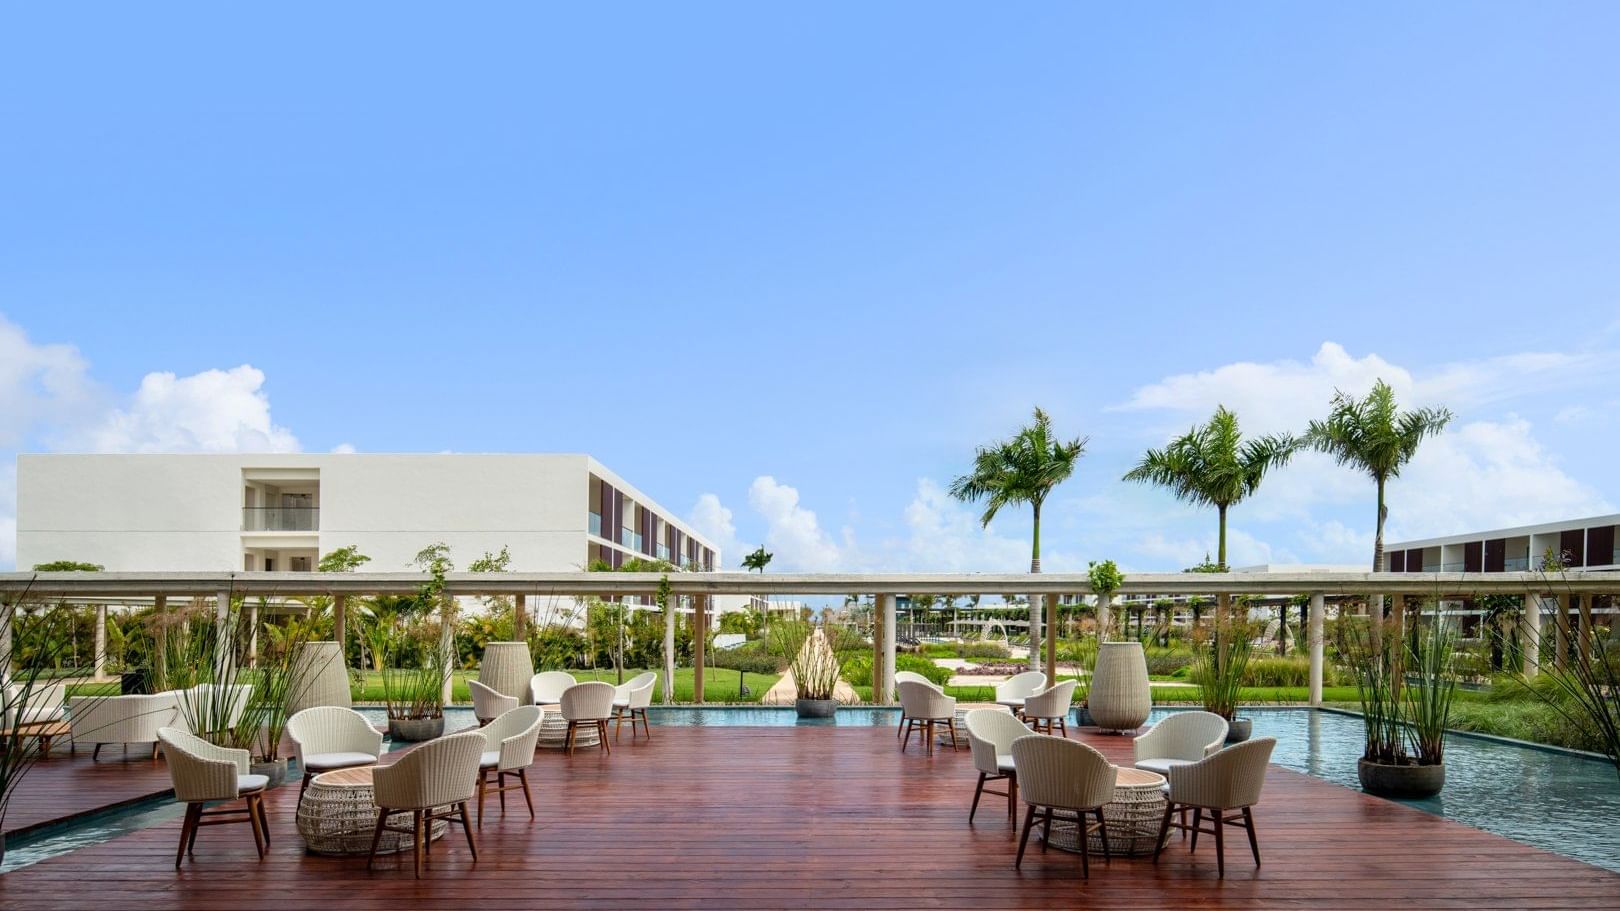 Terrace dining area by the pool at Live Aqua Resorts